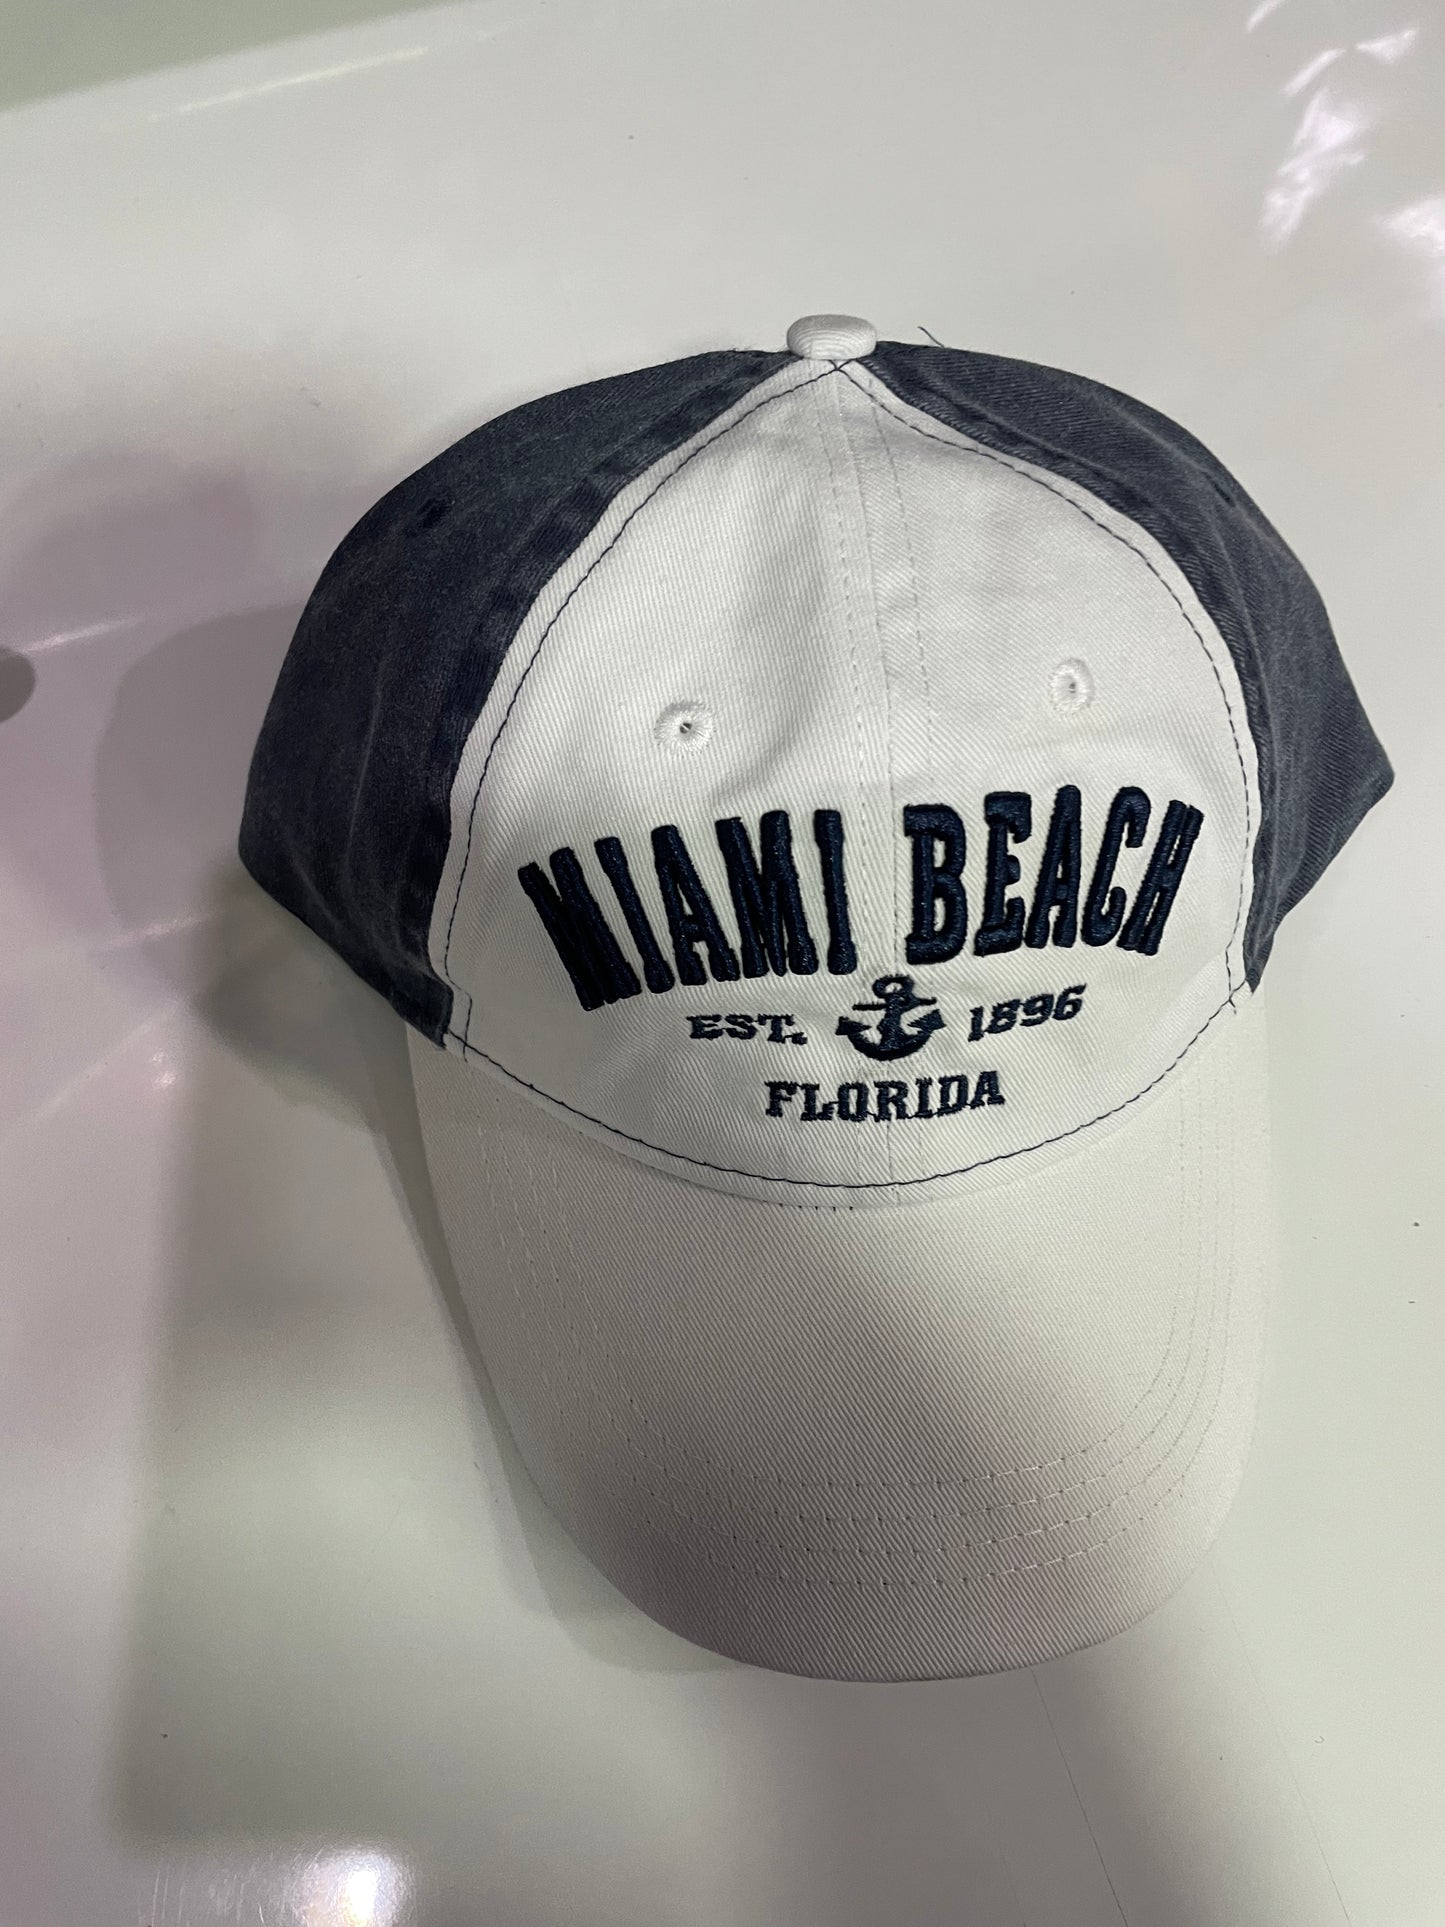 Miami Beach Florida Washed Style Adult Size Hat - Assortment Colors - One Size Fits Most, Dad Gift Baseball Cap